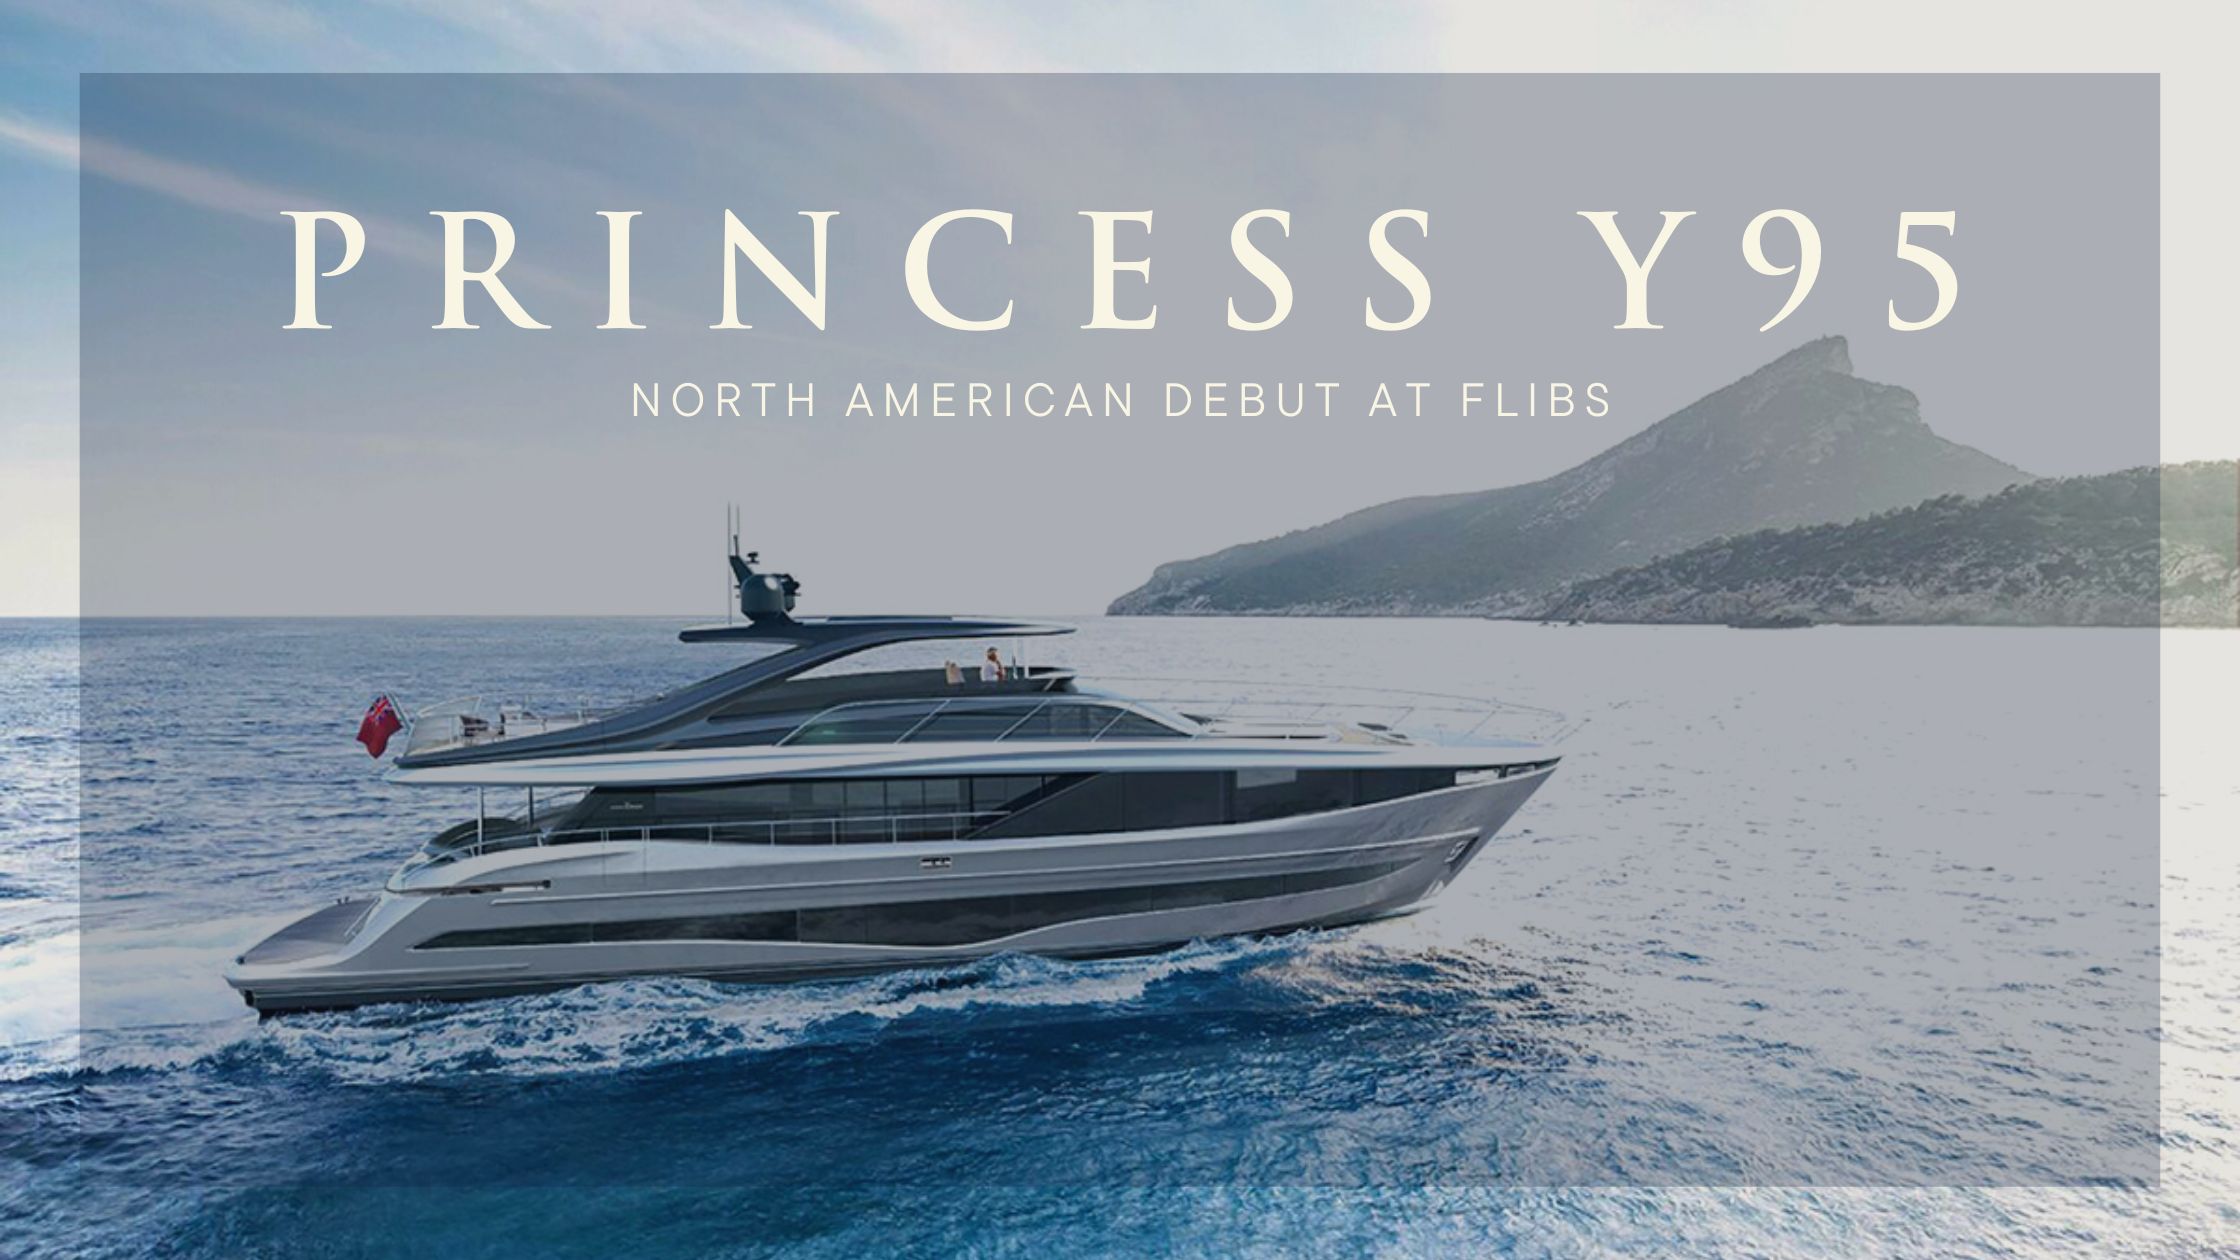 The Princess Y95 Debuts Stateside At The Fort Lauderdale Boat Show